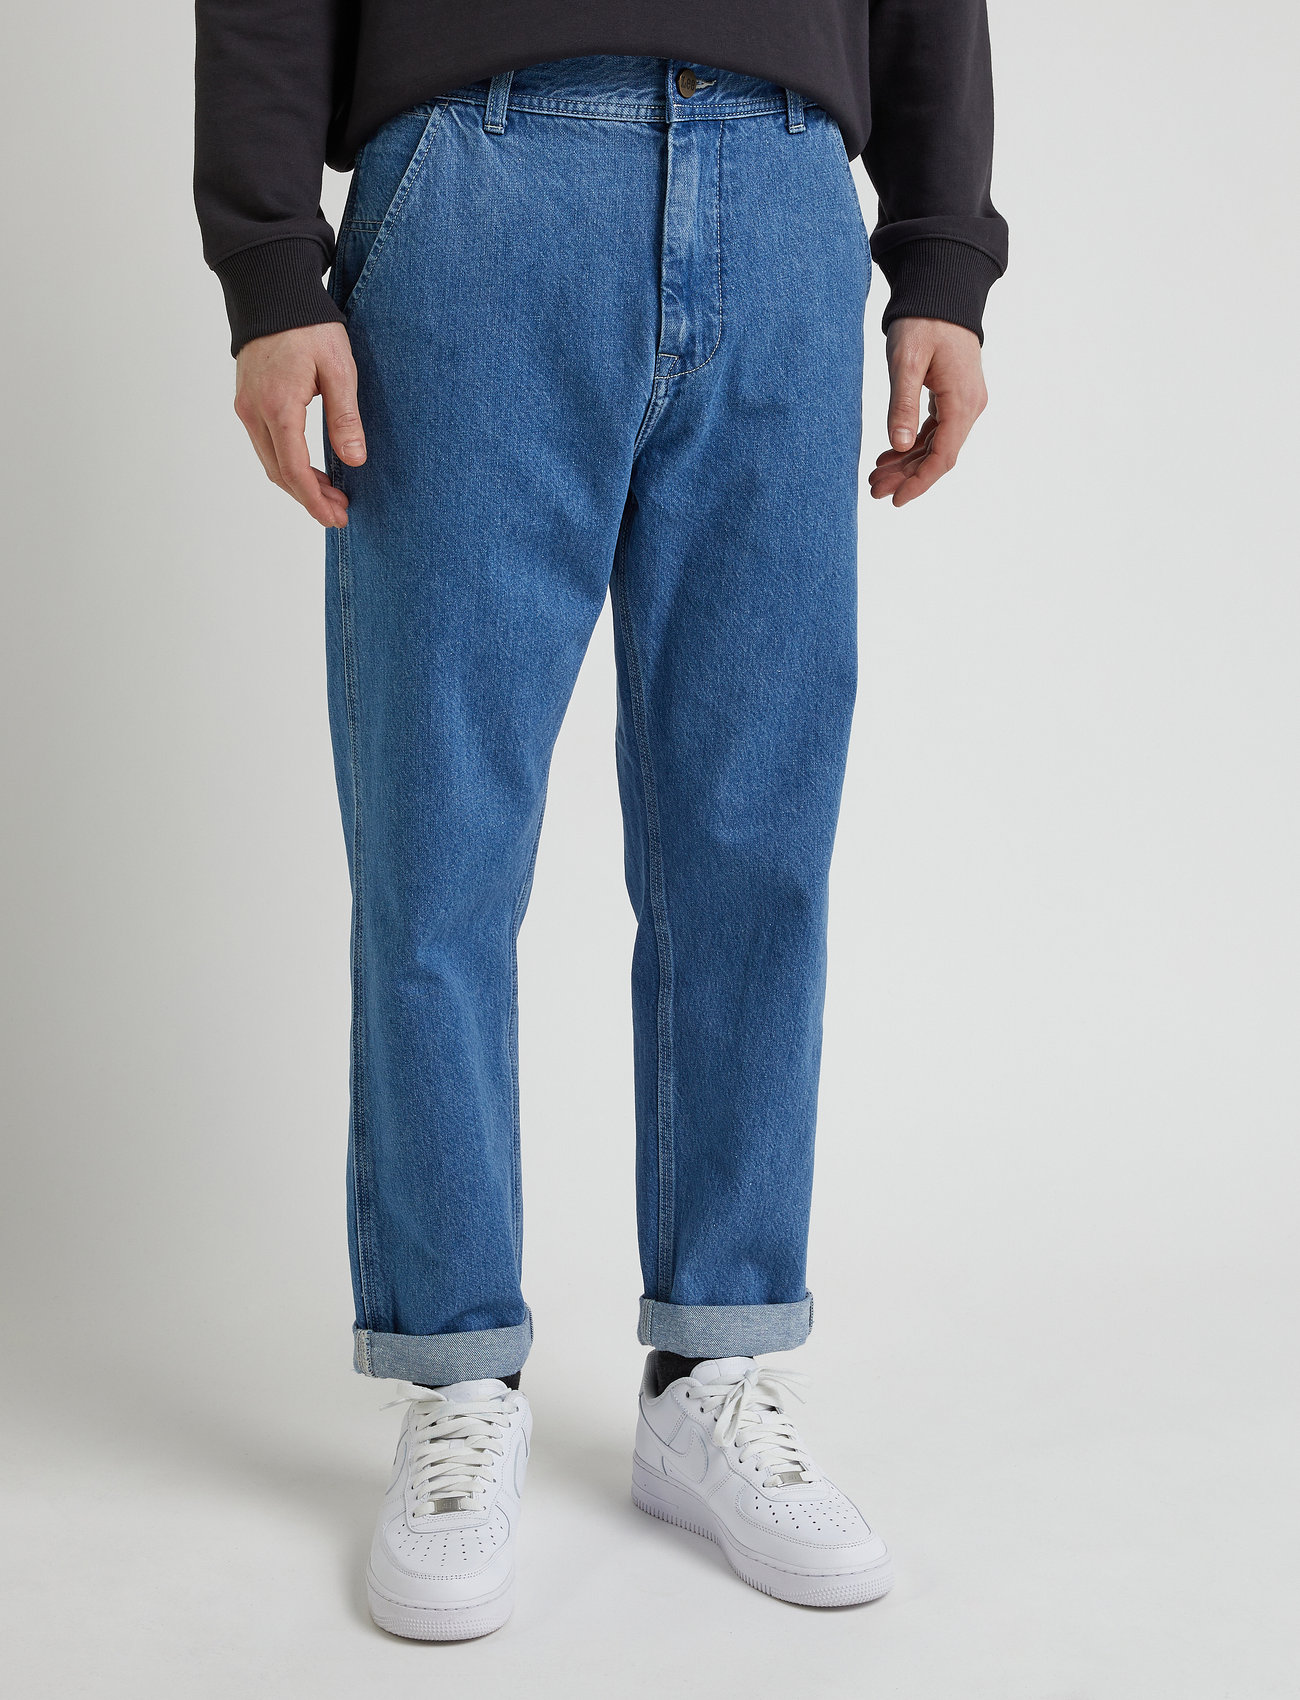 Lee Jeans 90s Pant - Relaxed jeans - Boozt.com